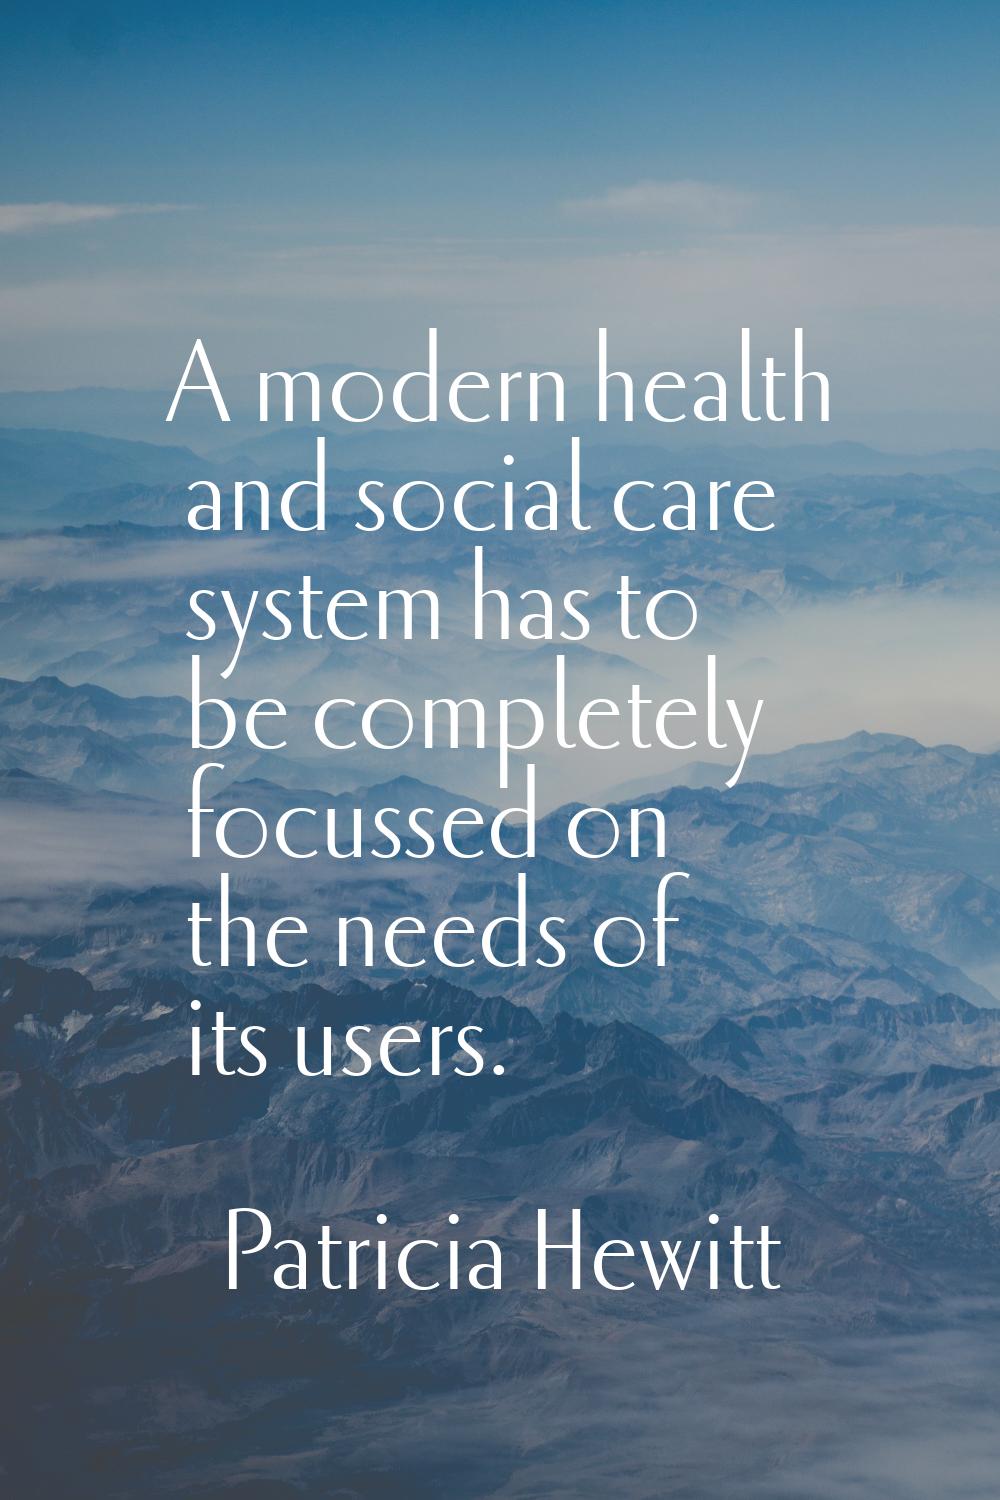 A modern health and social care system has to be completely focussed on the needs of its users.